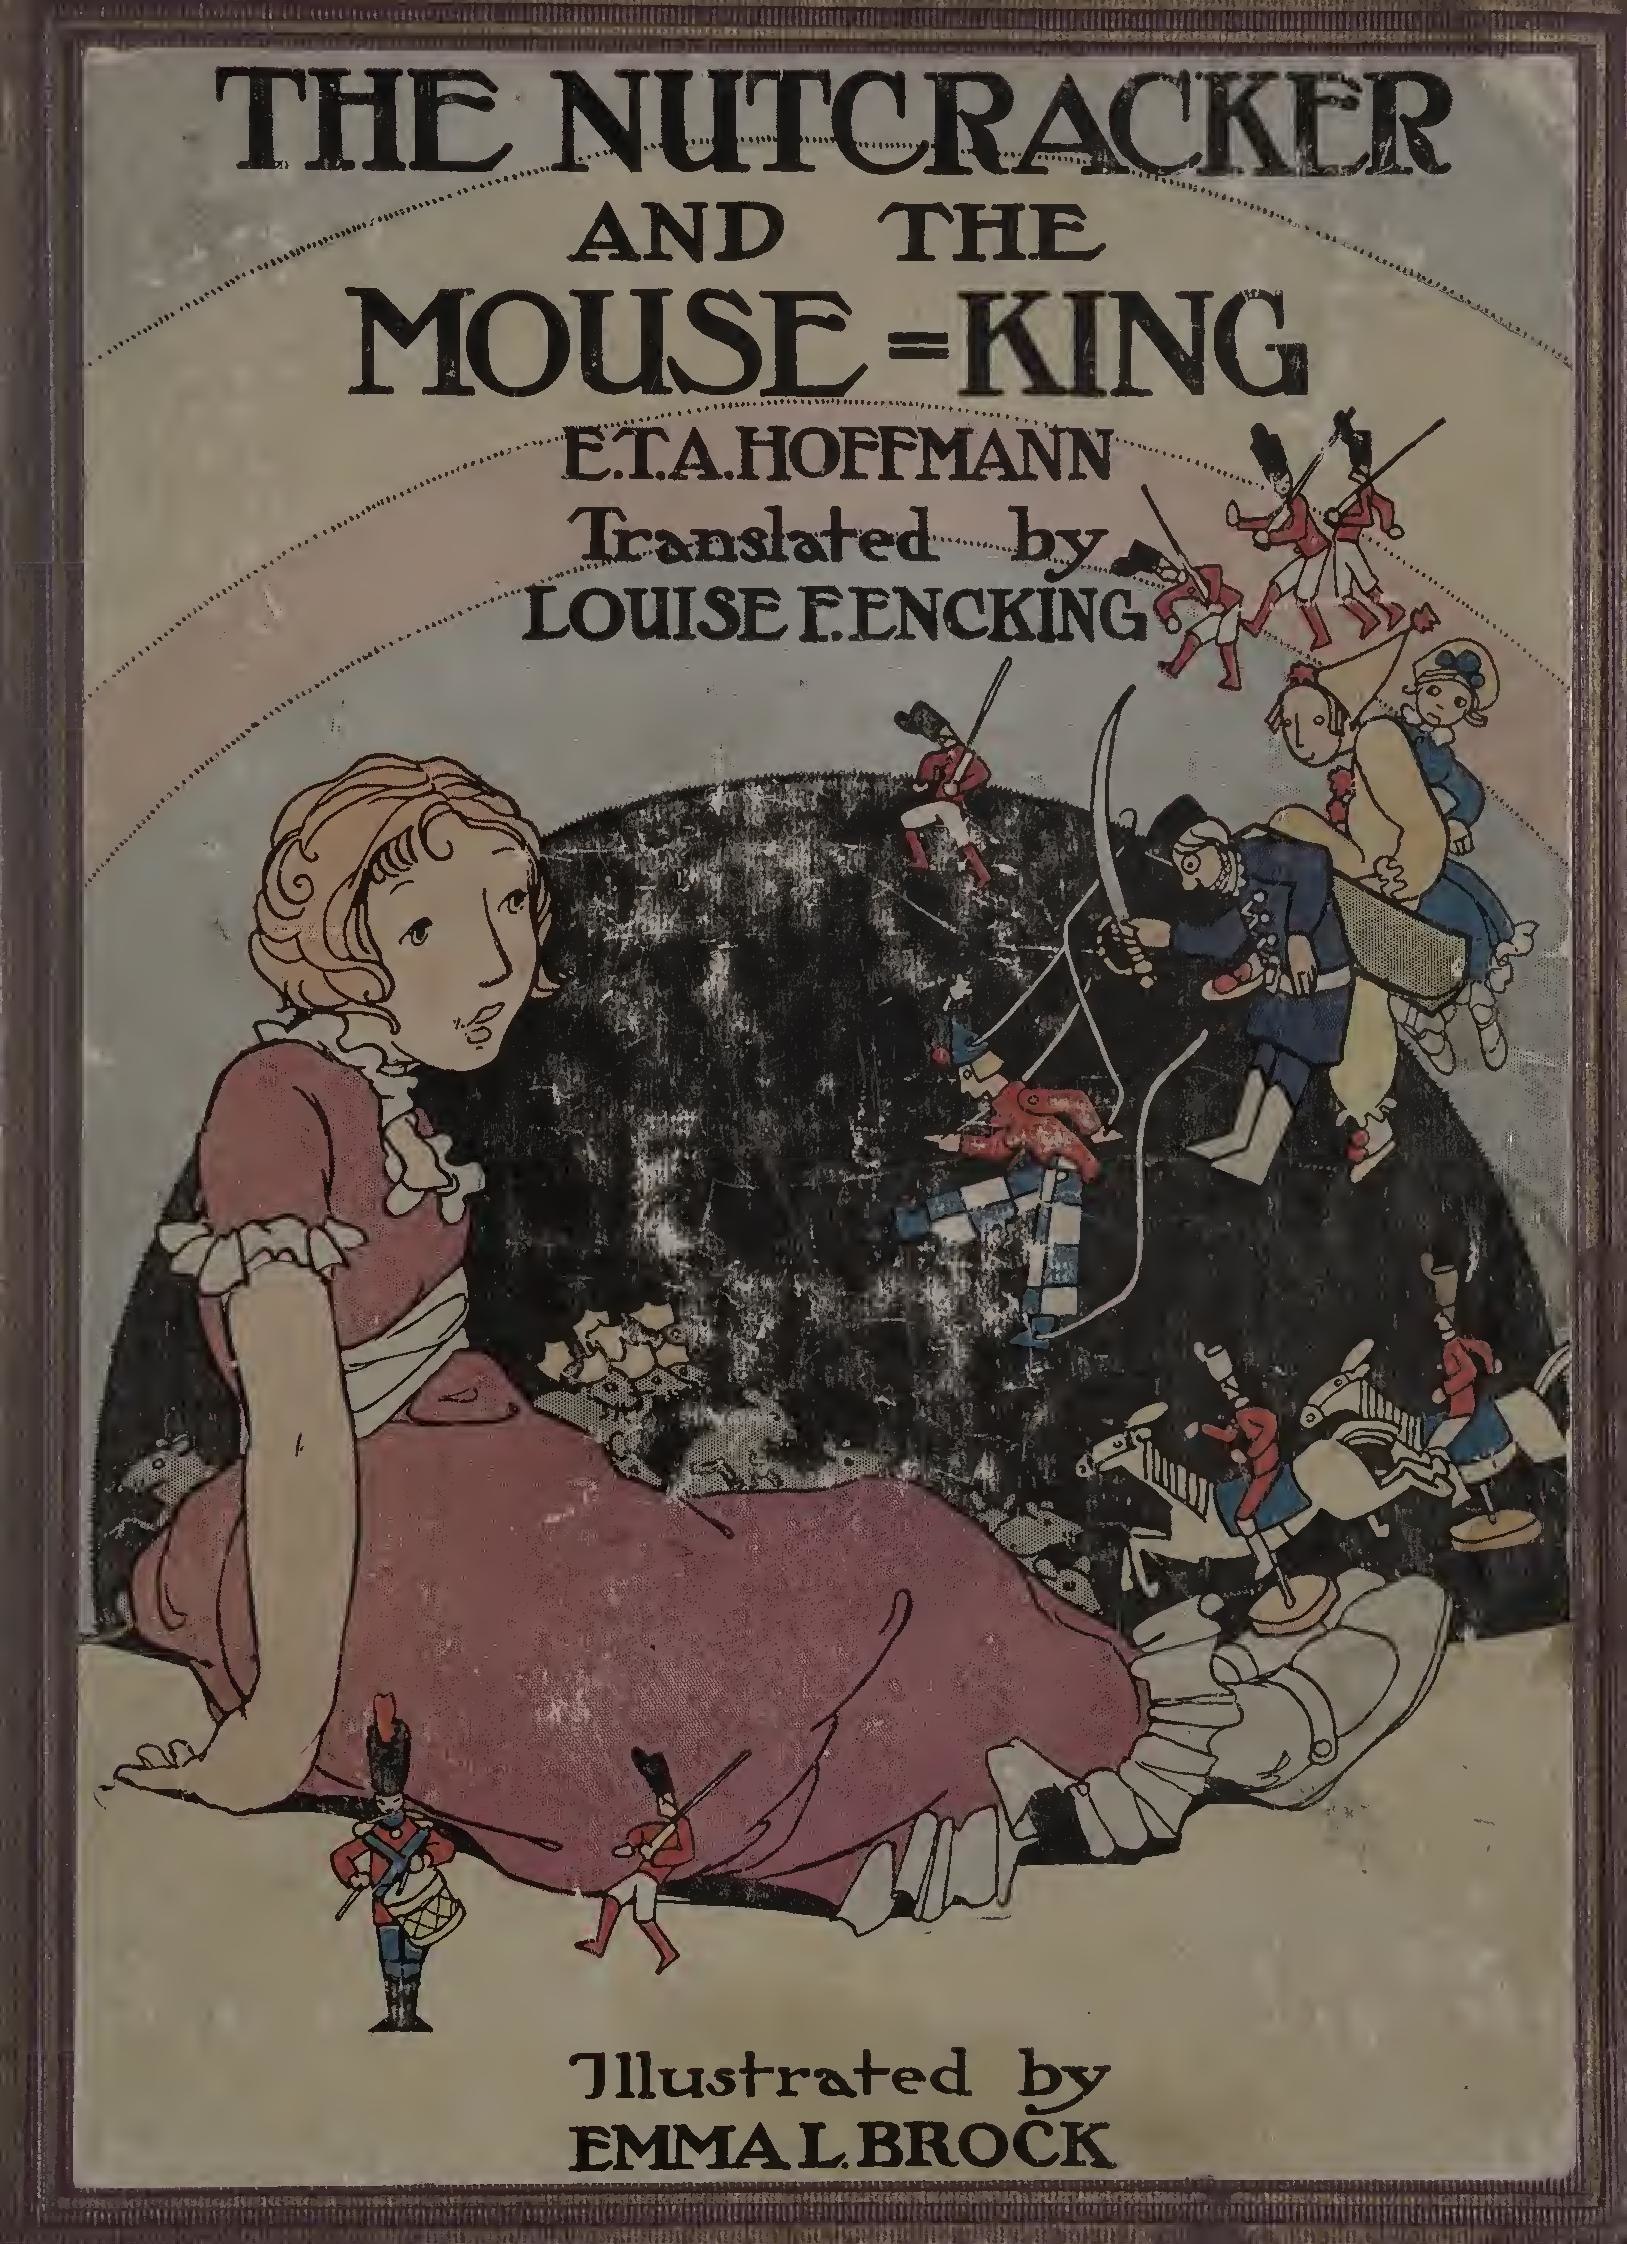 The Nutcracker and the Mouse King - Wikipedia